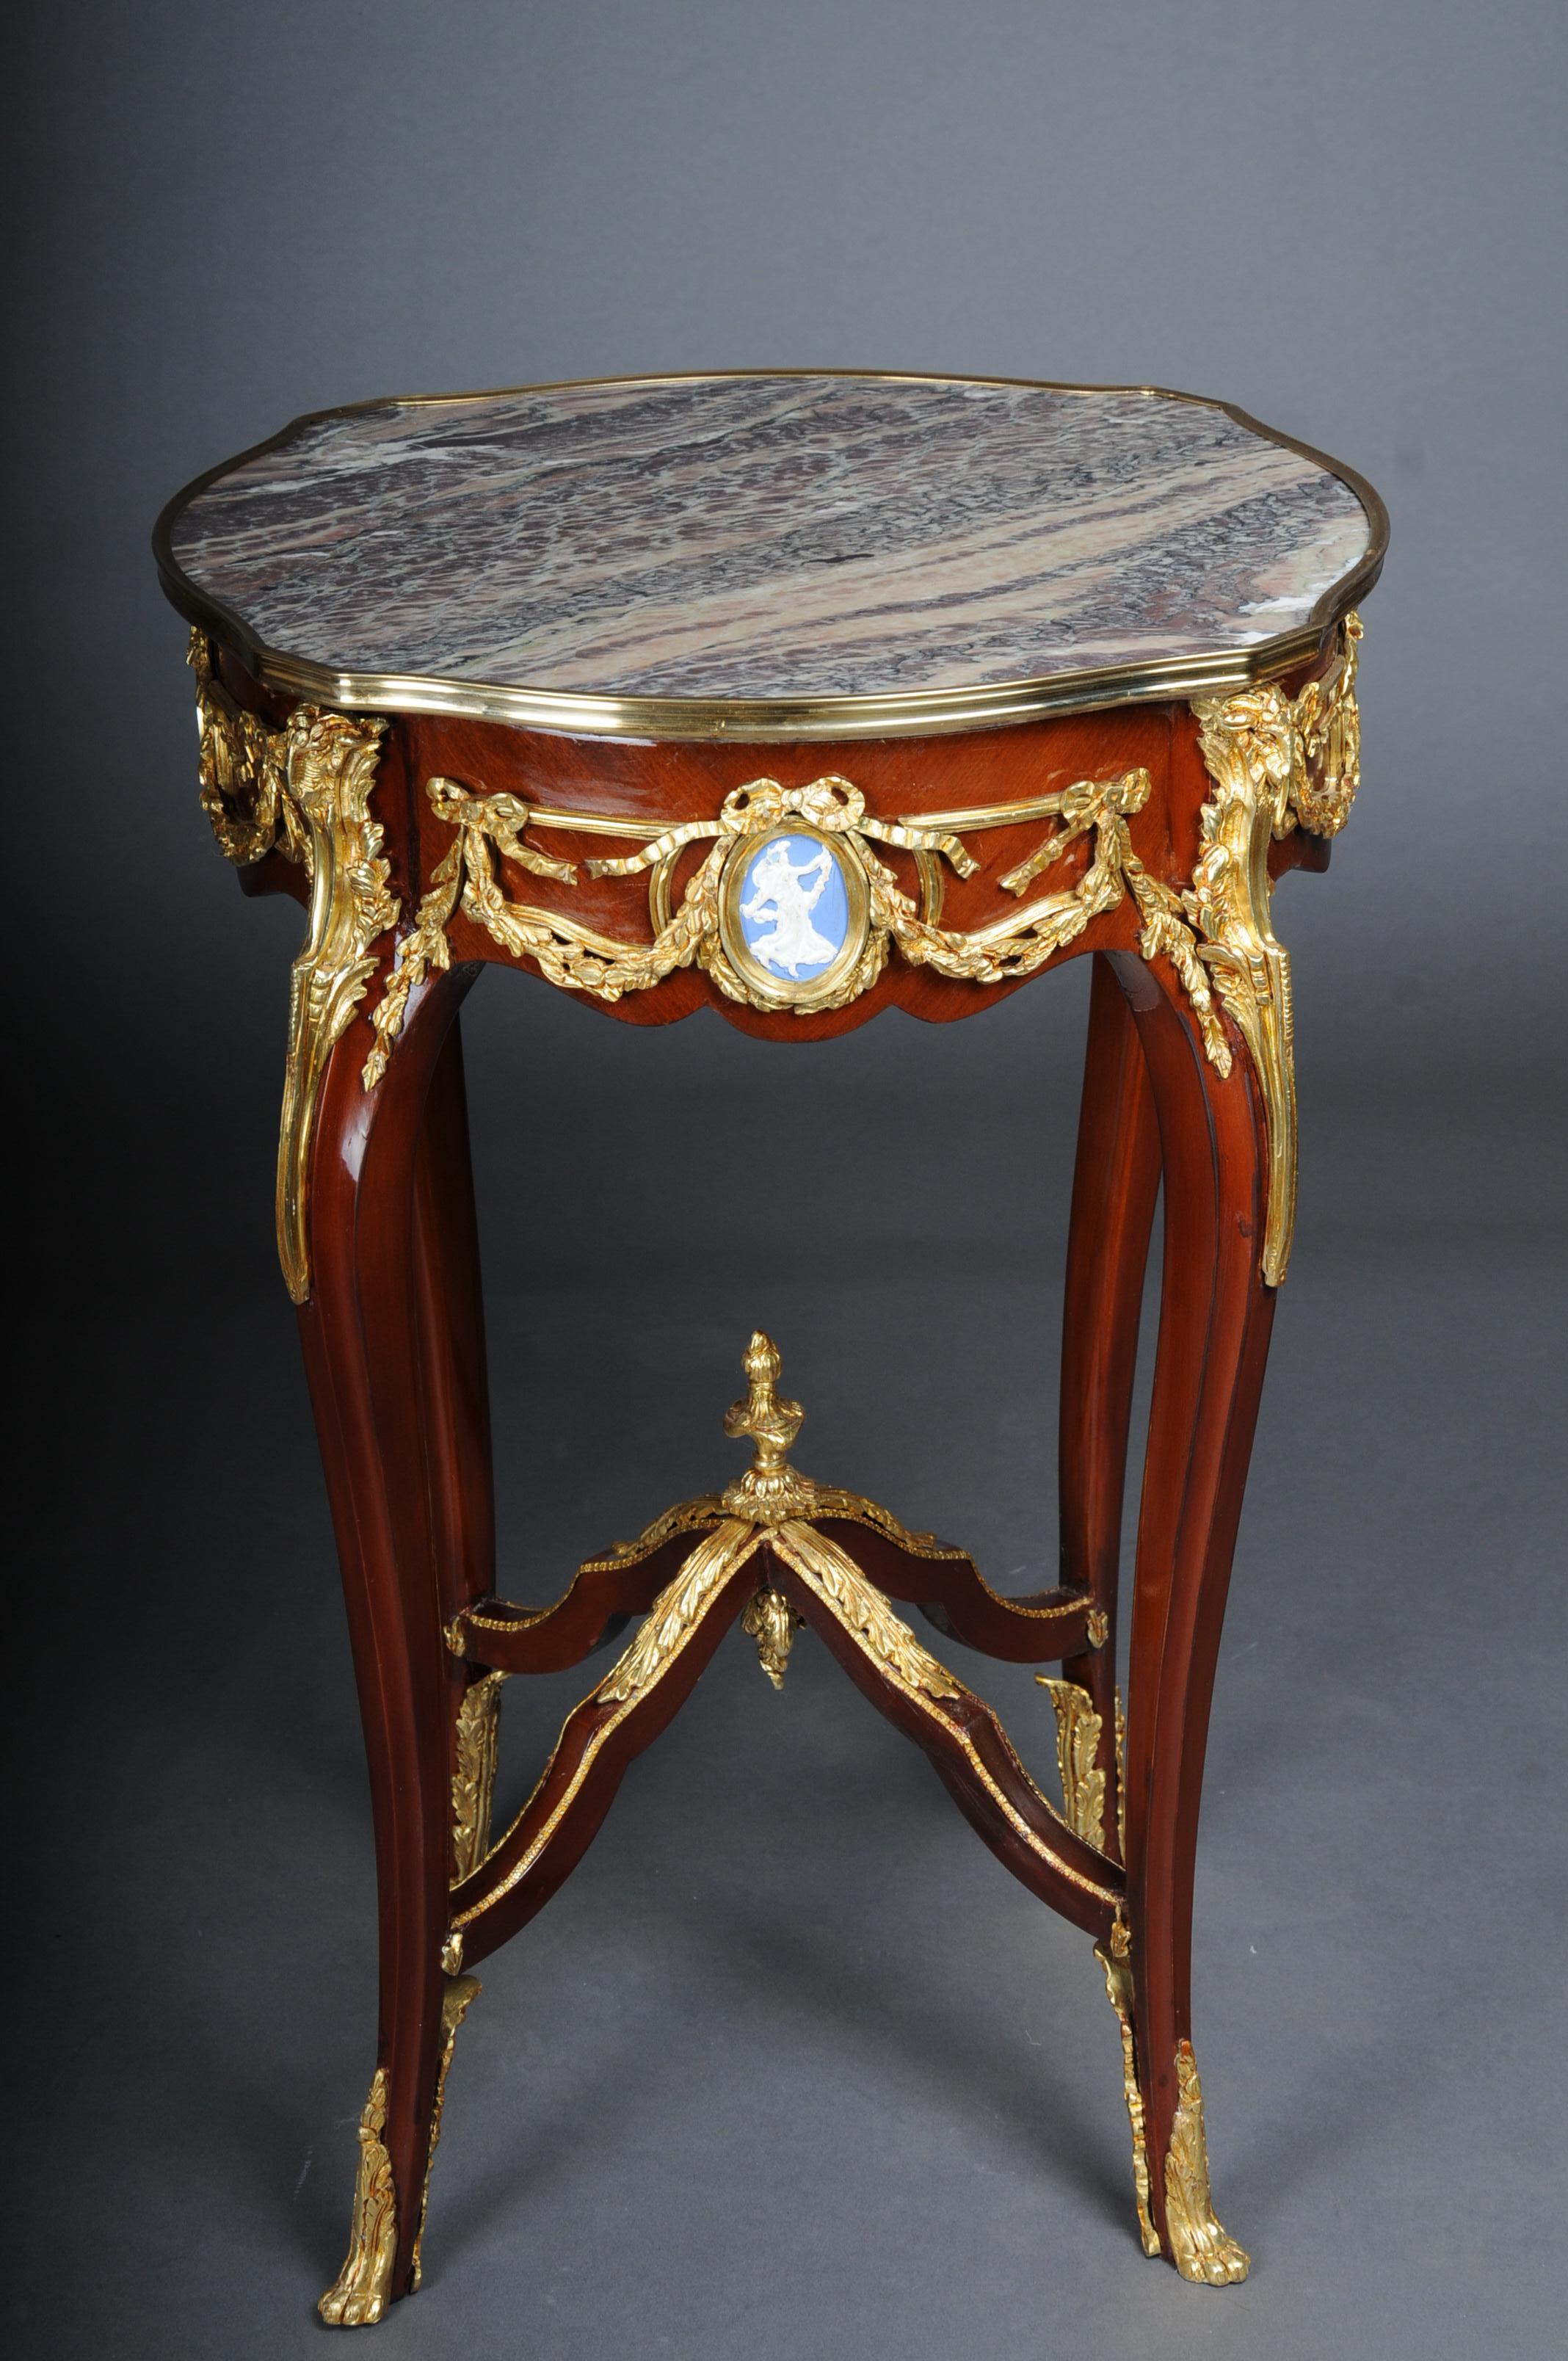 20th Century Grandiose side table with bronze Louis XV marble beech wood

Body made of solid beech wood with rich brass bronze decorations, gilded. Round marbled cover plate with gilded frame. The marble top has a stunning mottle. Each frame strip